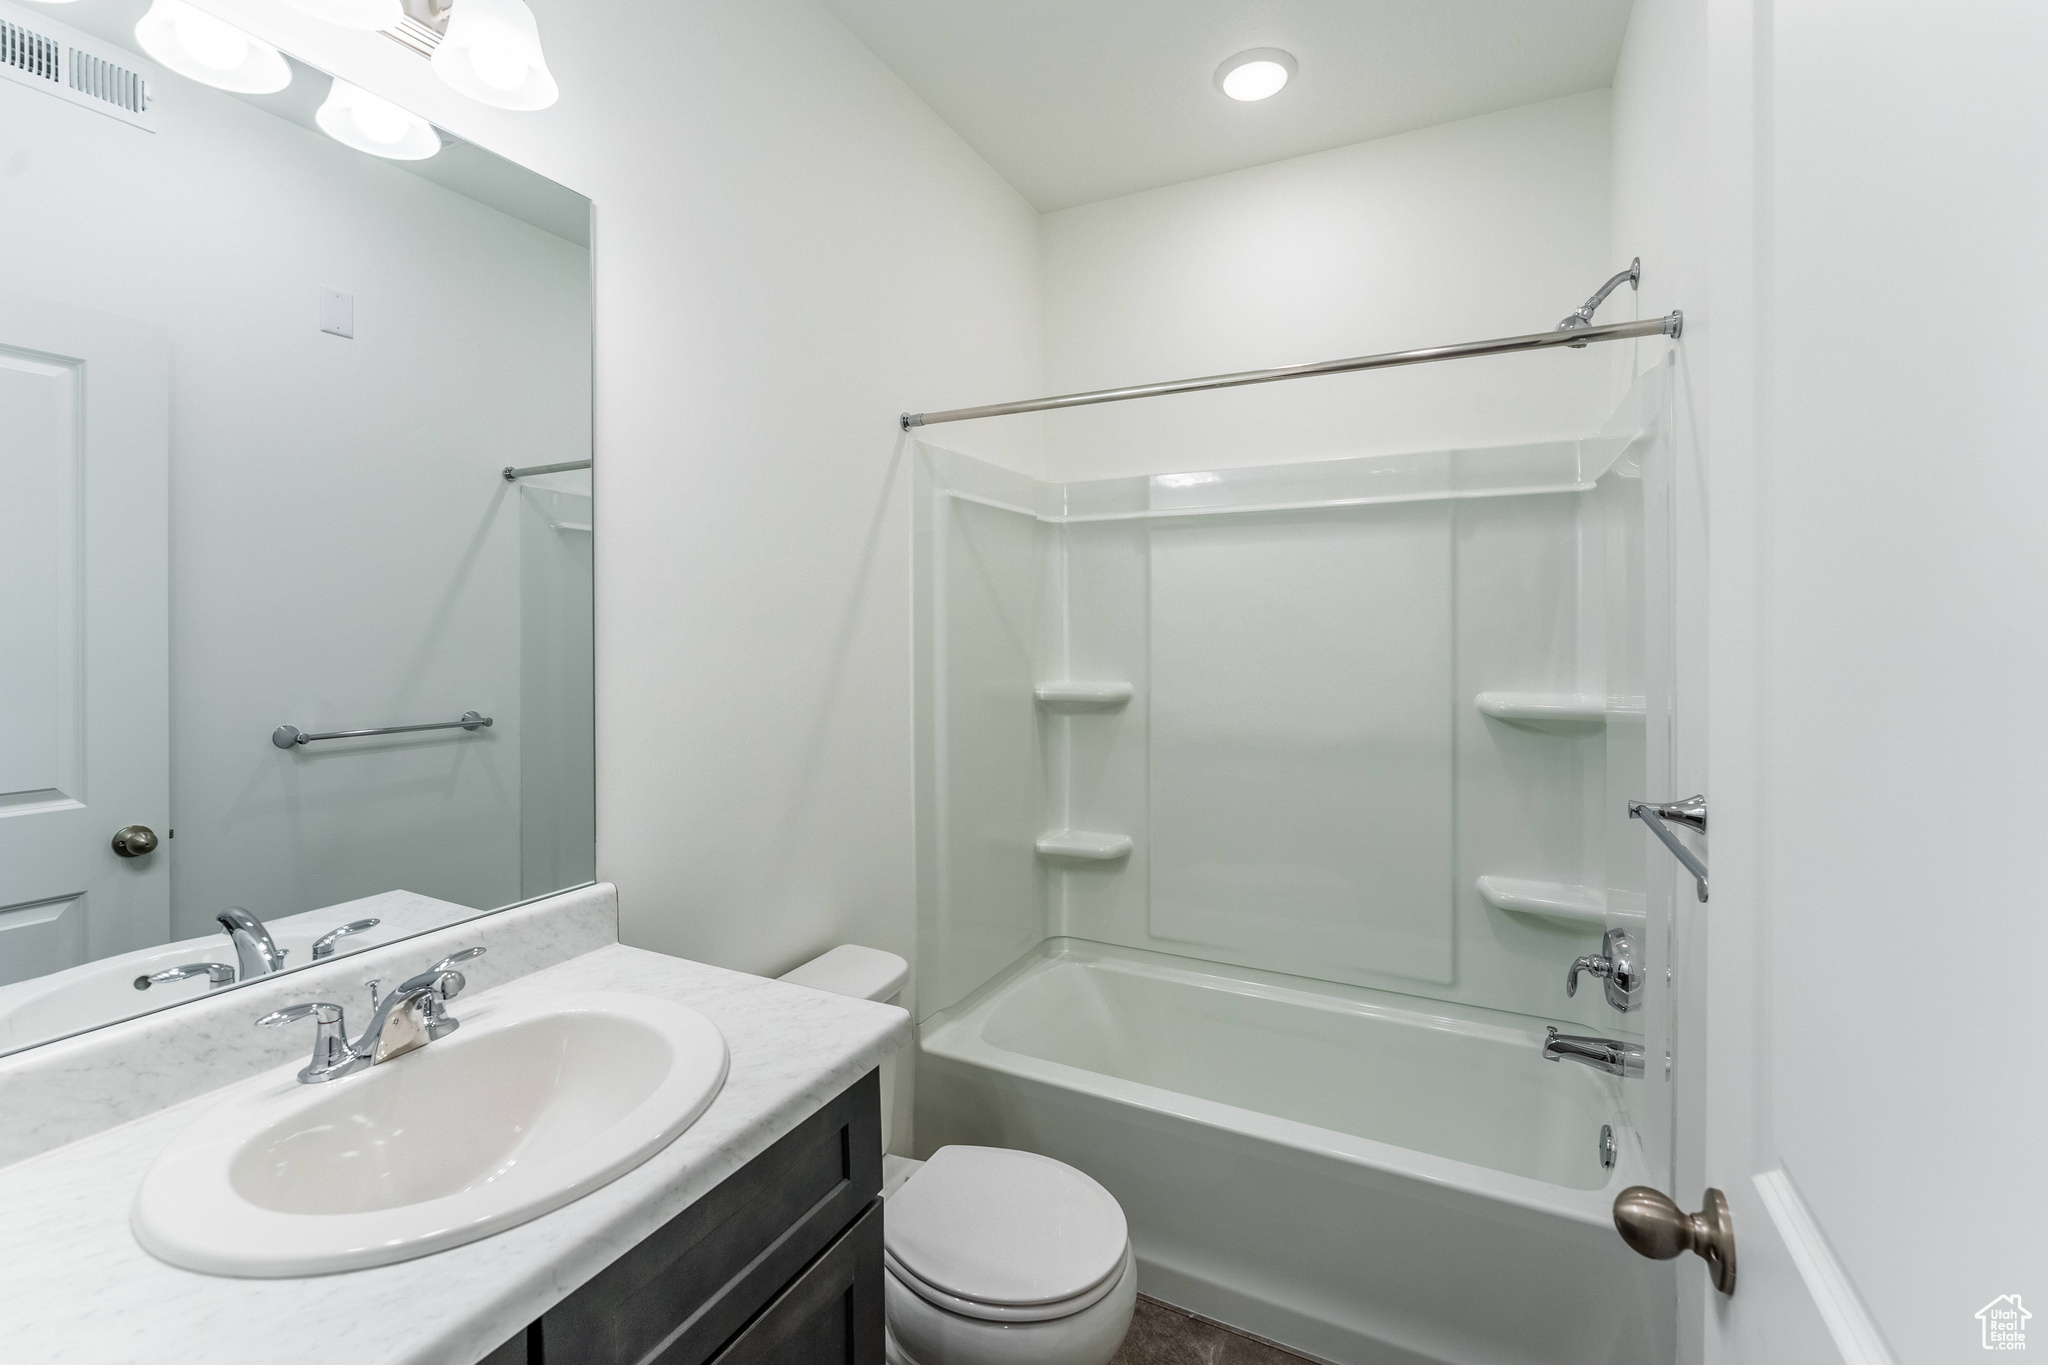 Full bathroom with toilet, bathtub / shower combination, and vanity